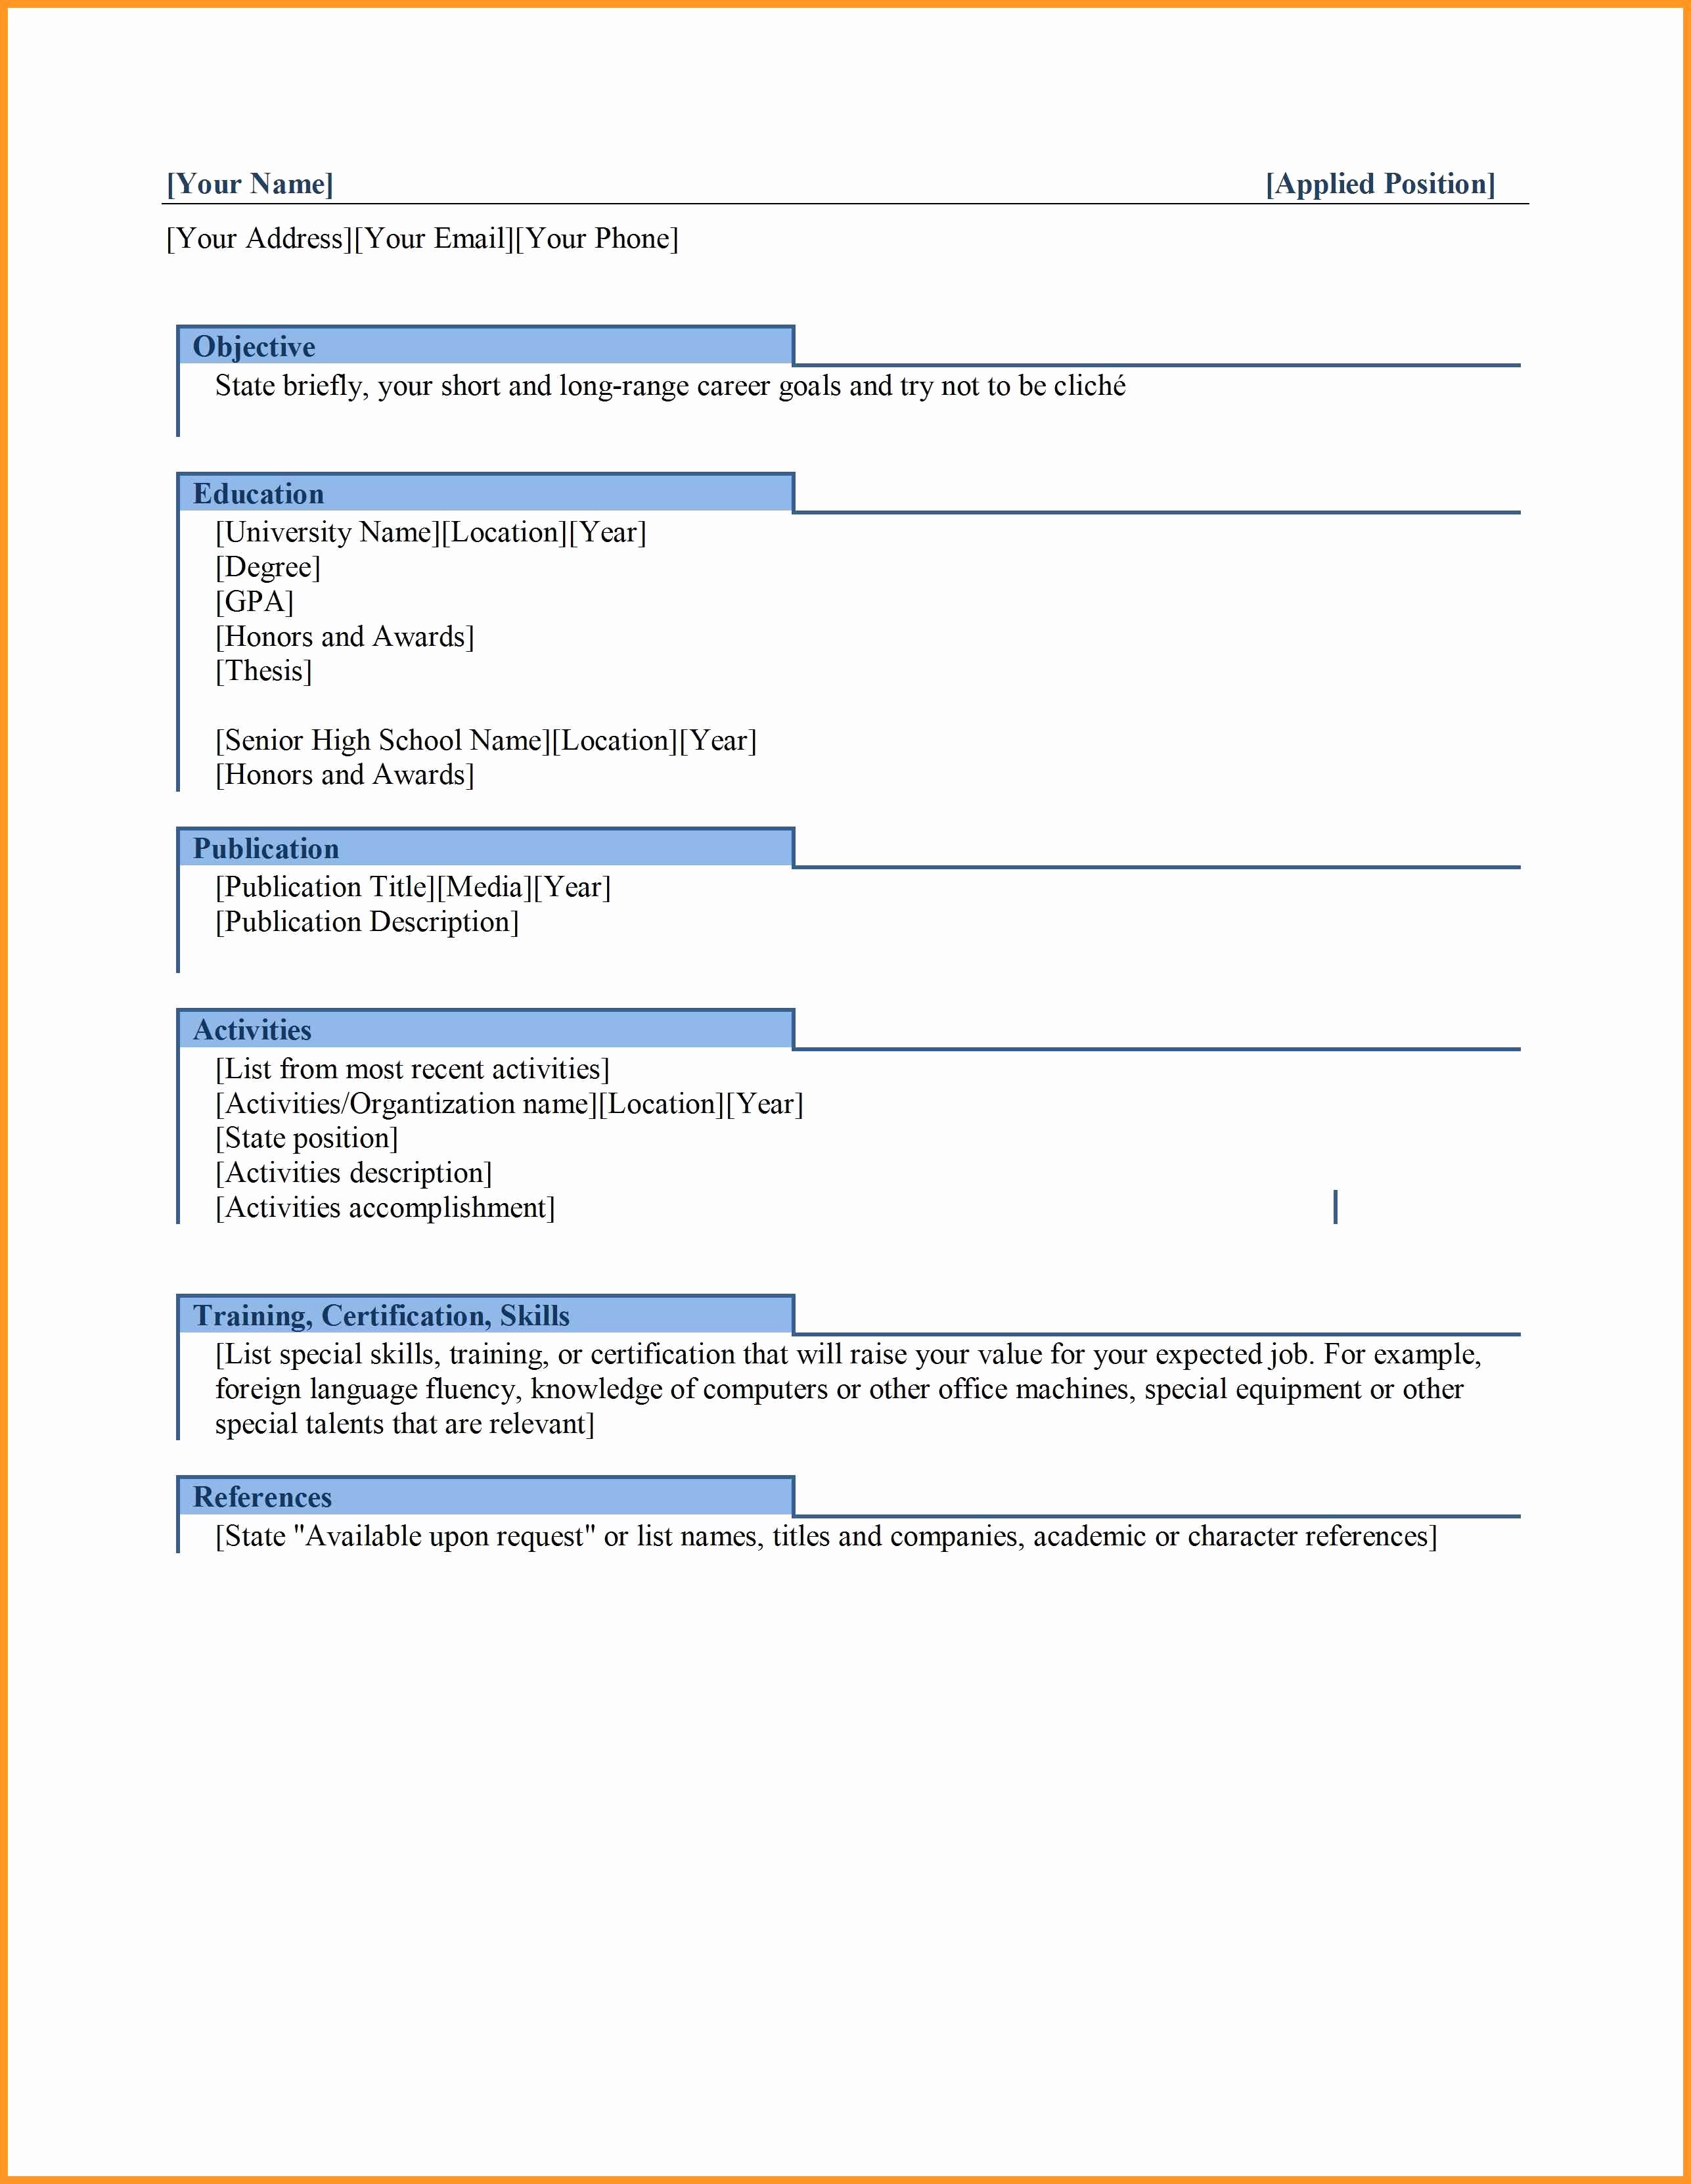 Ms Office Templates for Word Lovely Microsoft Office Word Templates Free